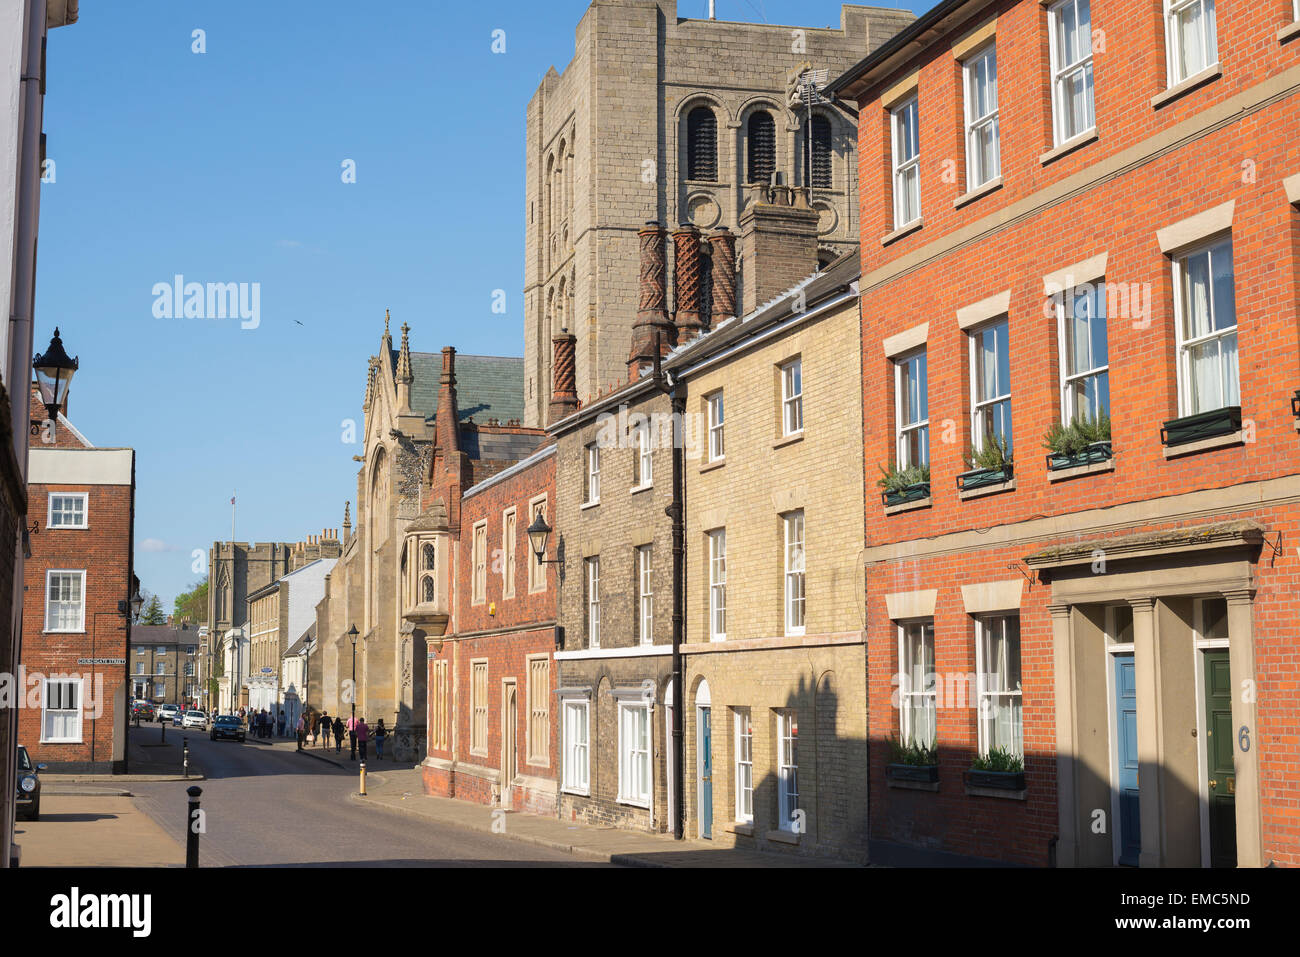 Bury St Edmunds architecture, view of Crown Street in which a diverse range of architectural styles typical of Bury St Edmunds is displayed, Suffolk Stock Photo